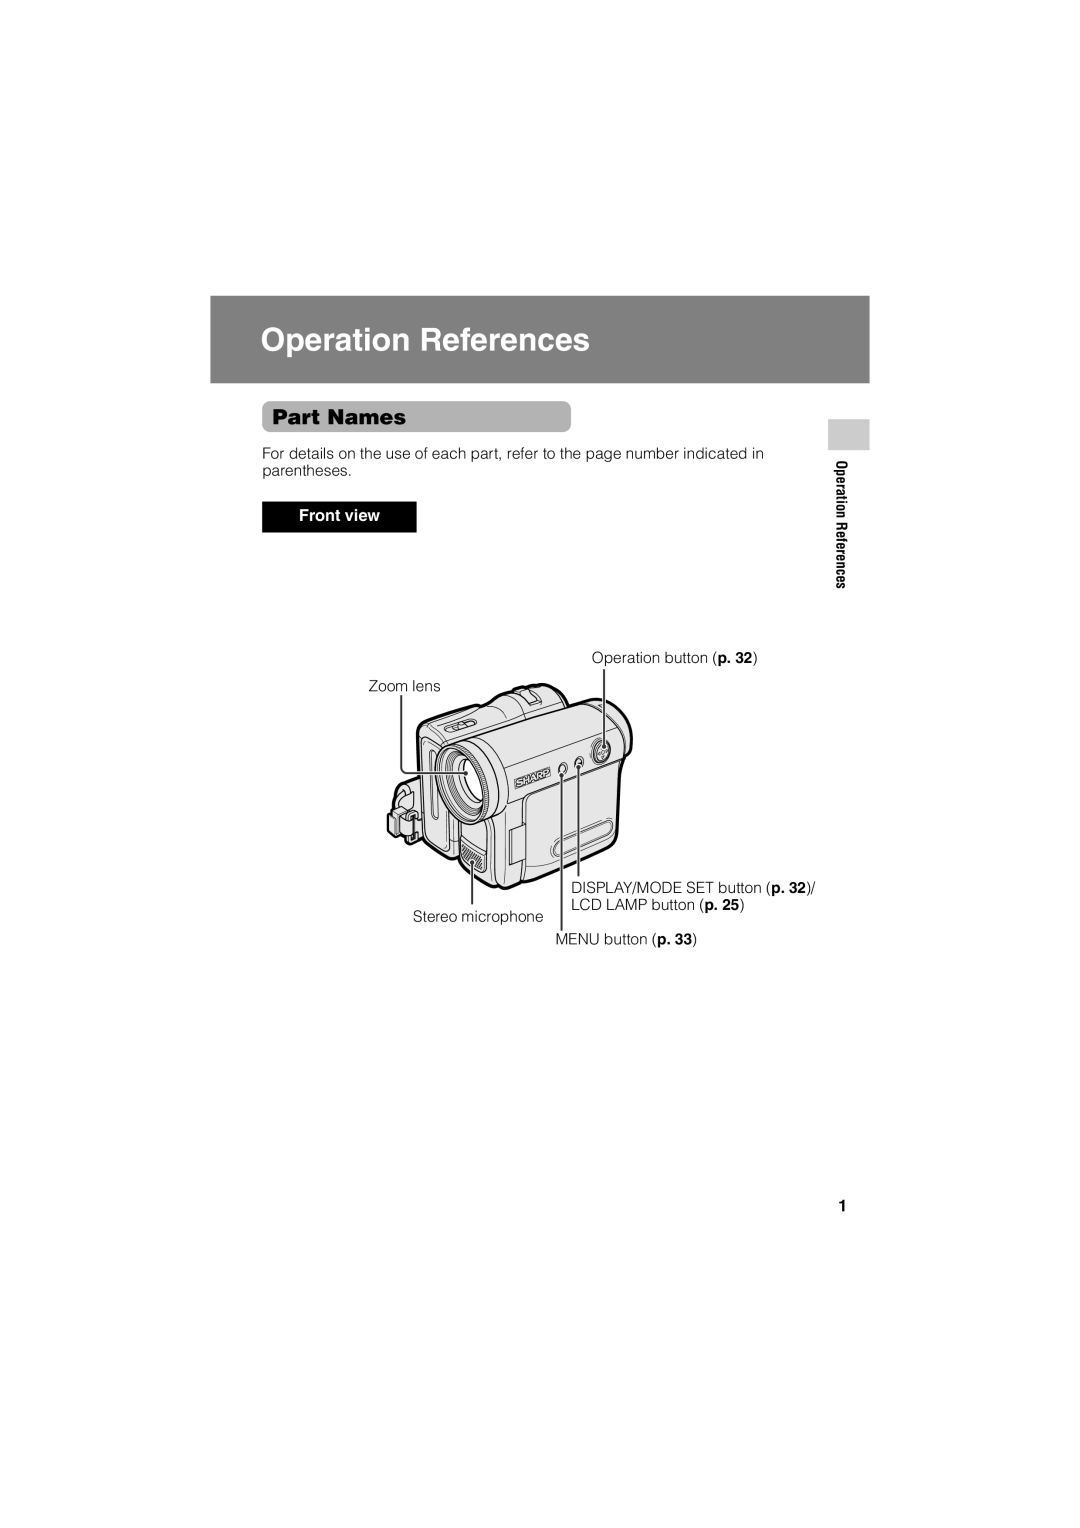 Sharp VL-Z400H-T operation manual Operation References, Part Names, Front view 